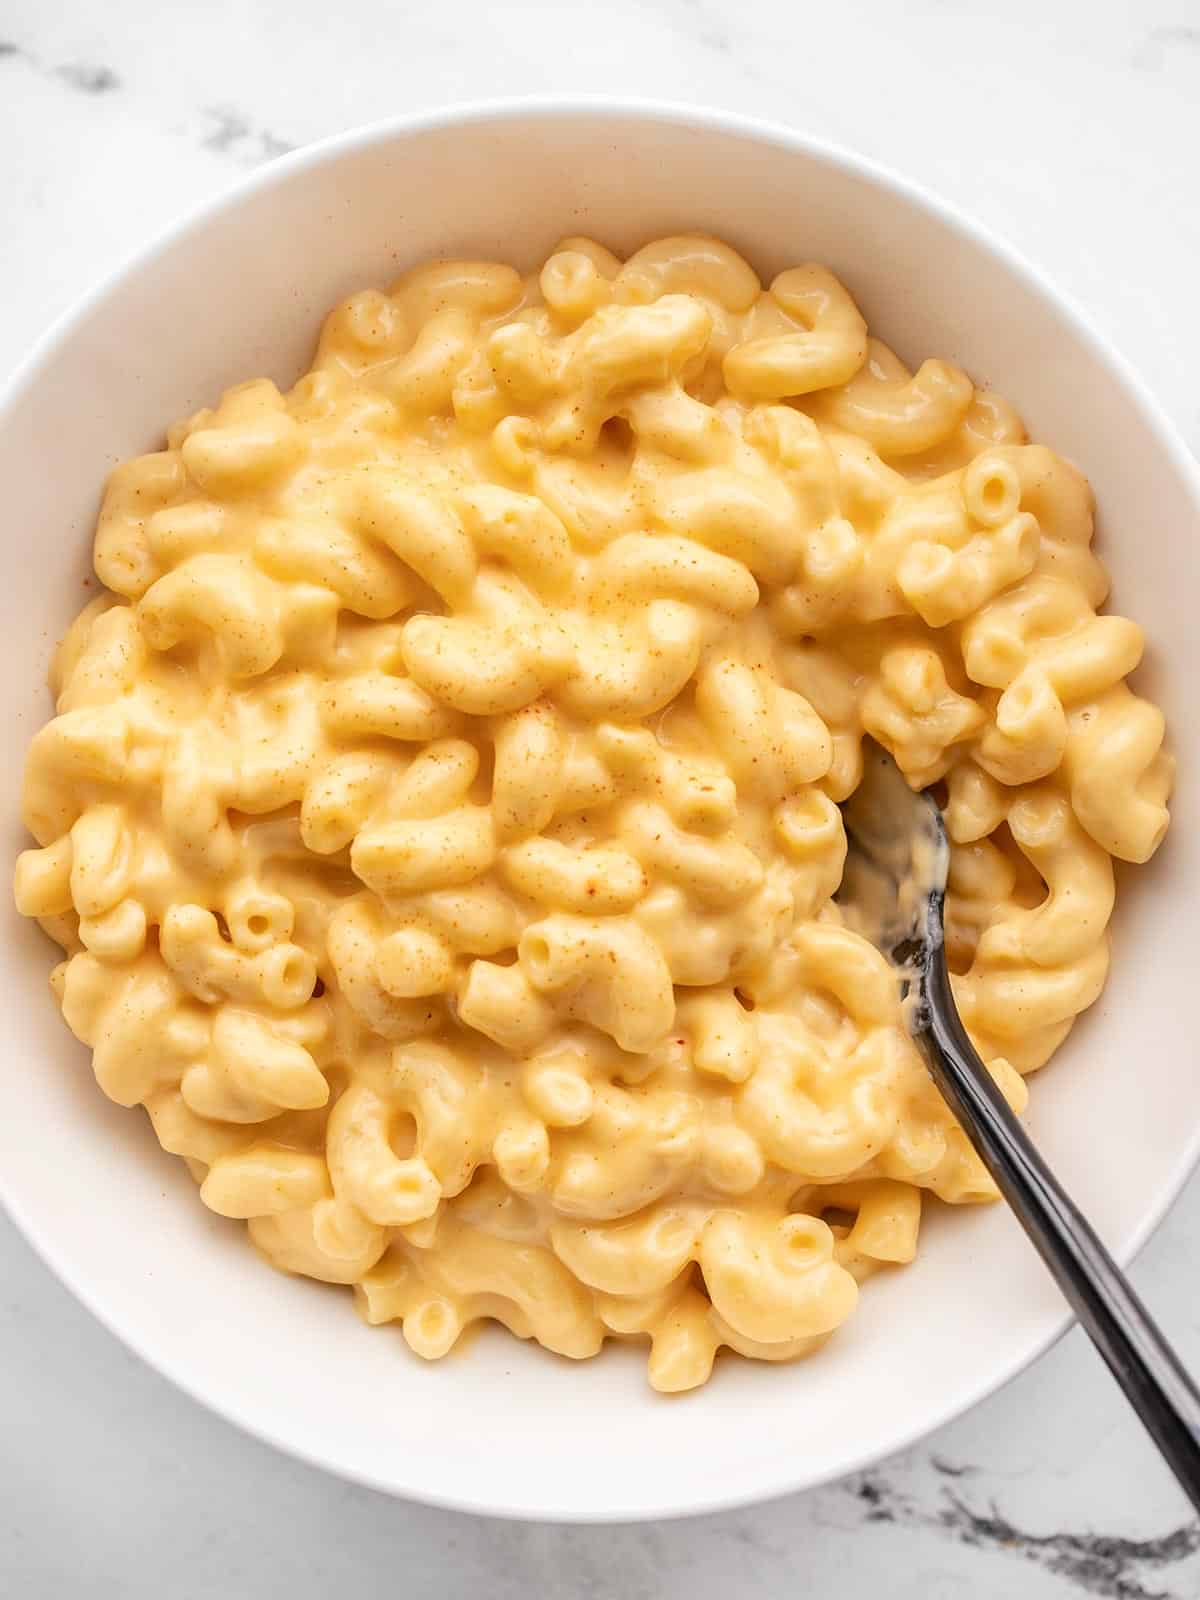 Overhead view of a bowl of mac and cheese with a fork